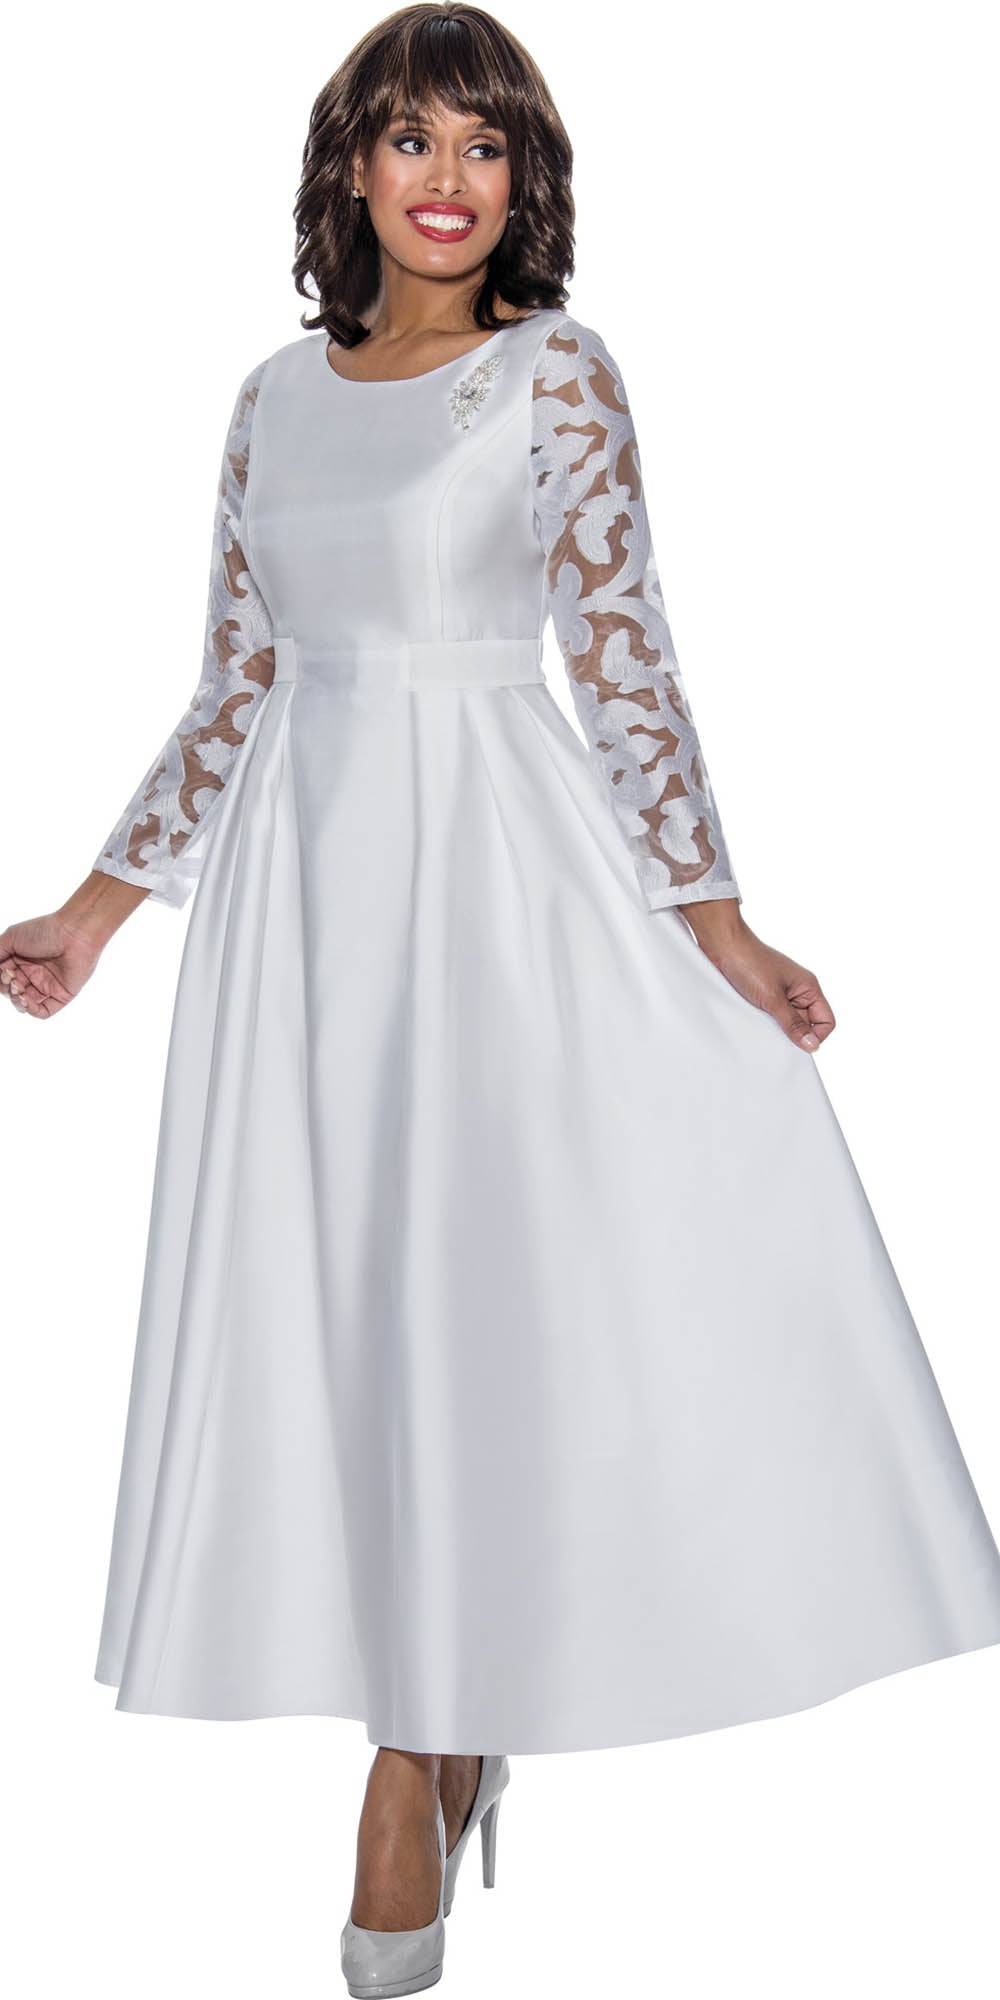 Dresses by Nubiano - 1471 - White - Sheer Sleeve Dress